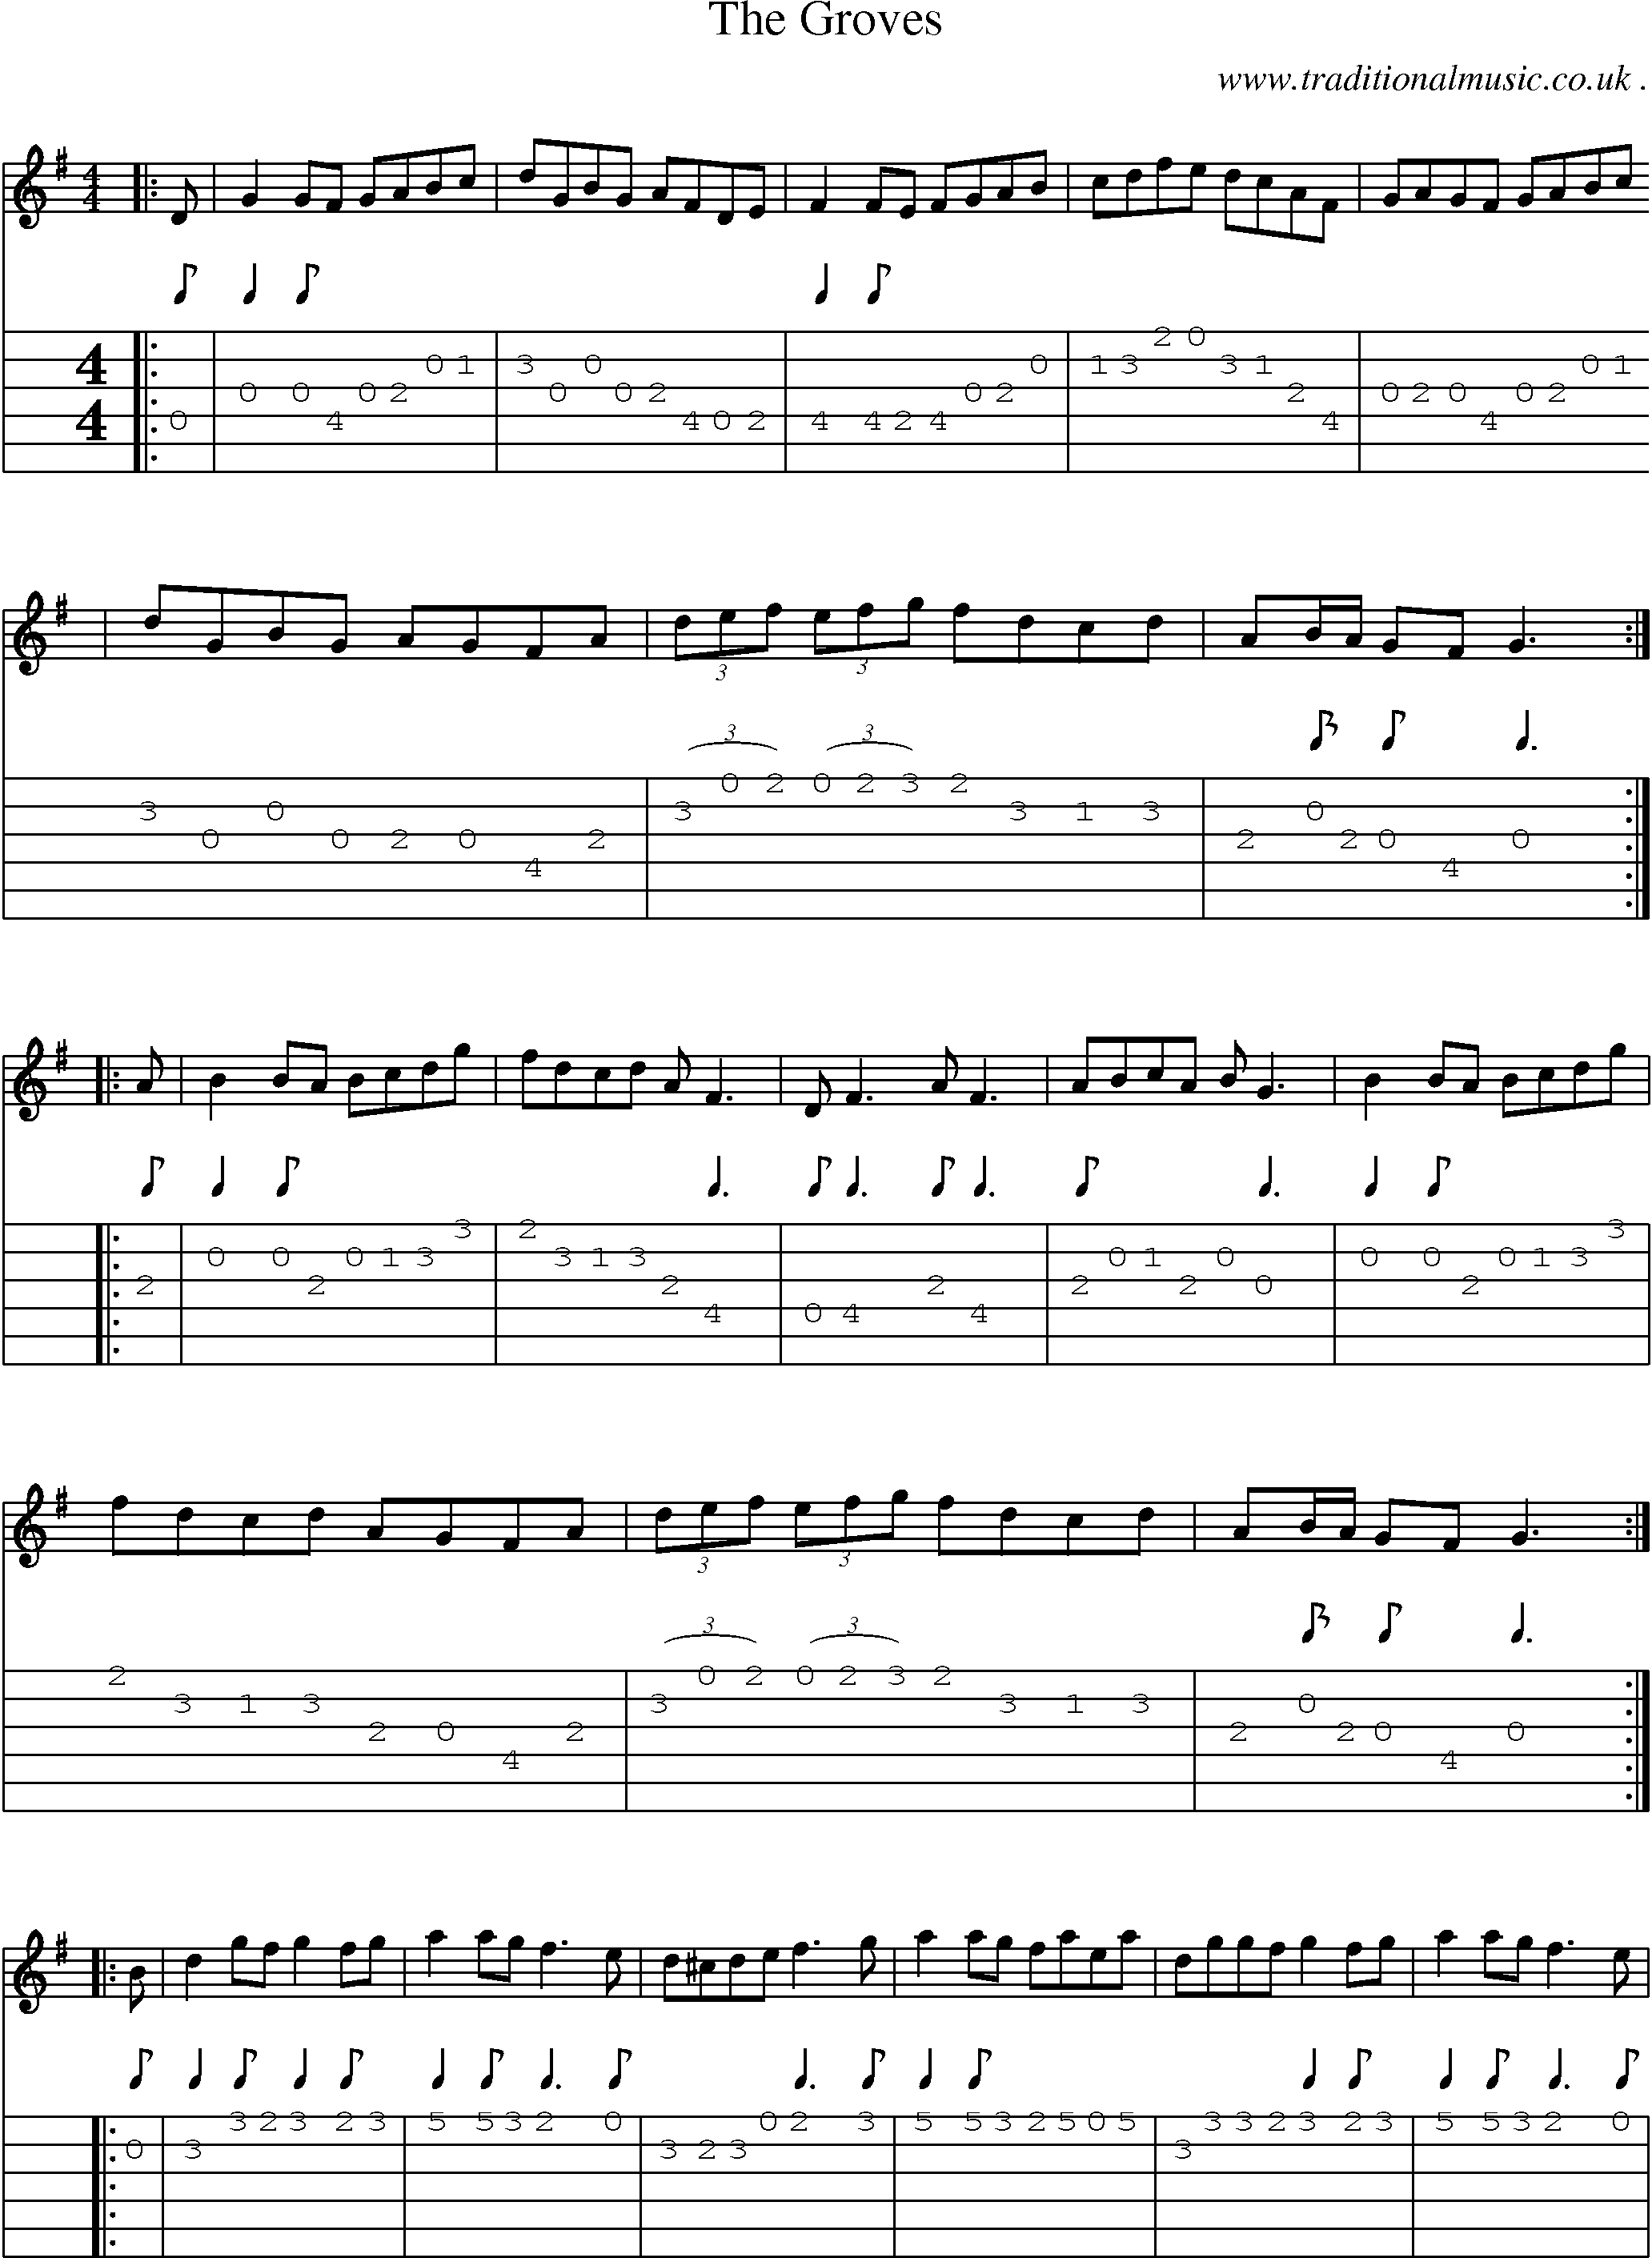 Sheet-Music and Guitar Tabs for The Groves